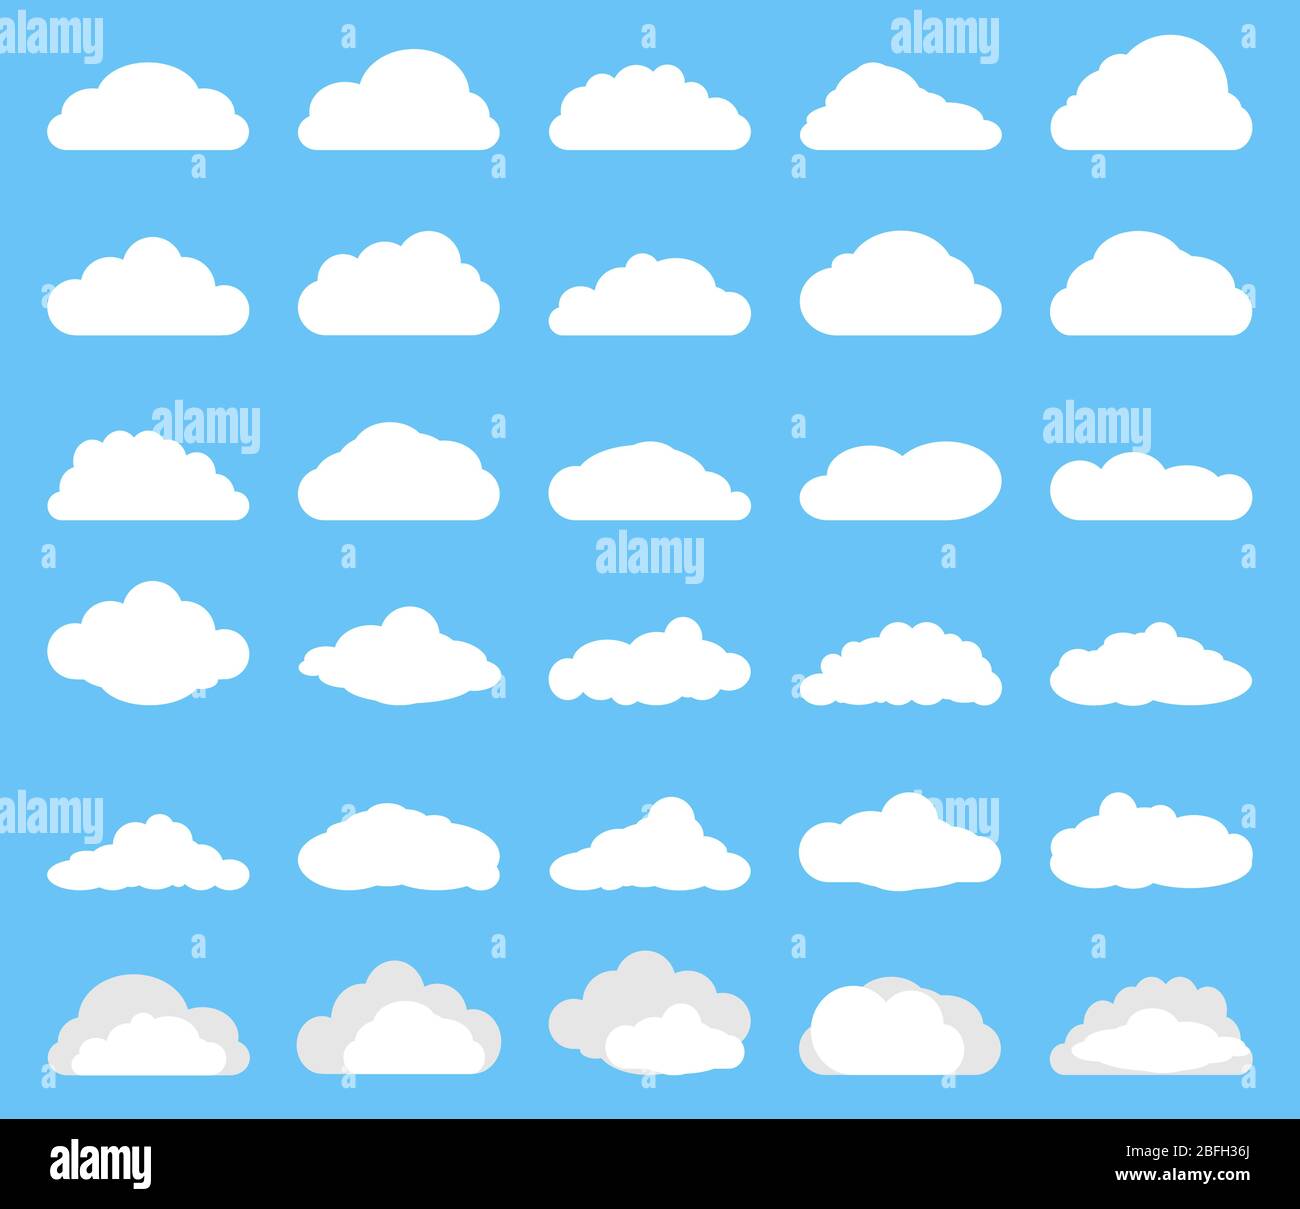 white cloud icon set on blue background vector illustration Stock Vector